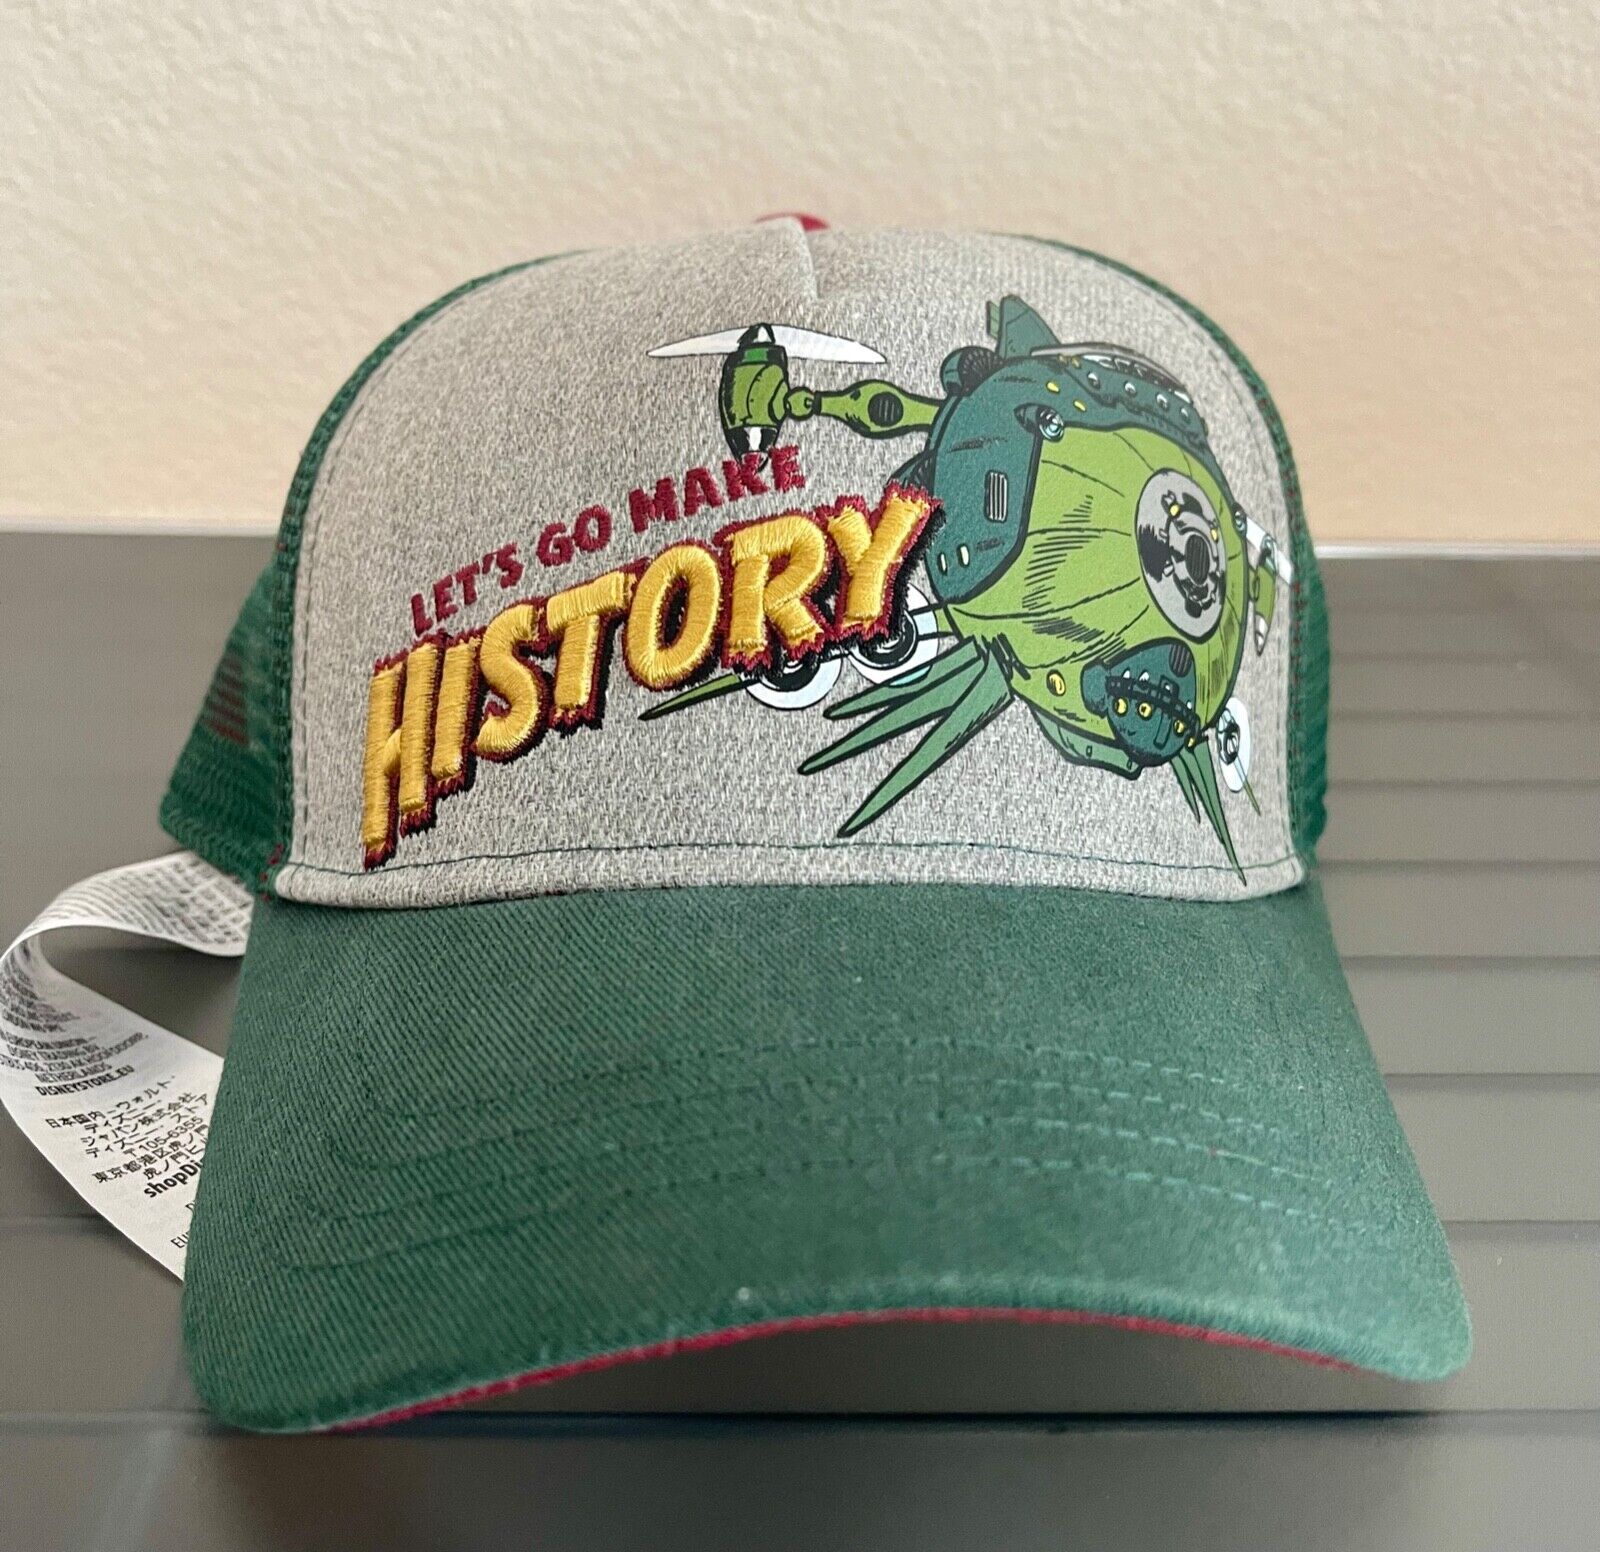 DISNEY PARKS LETS GO MAKE HISTORY SNAP BACK TRUCKER CAP NEW WITH TAGS